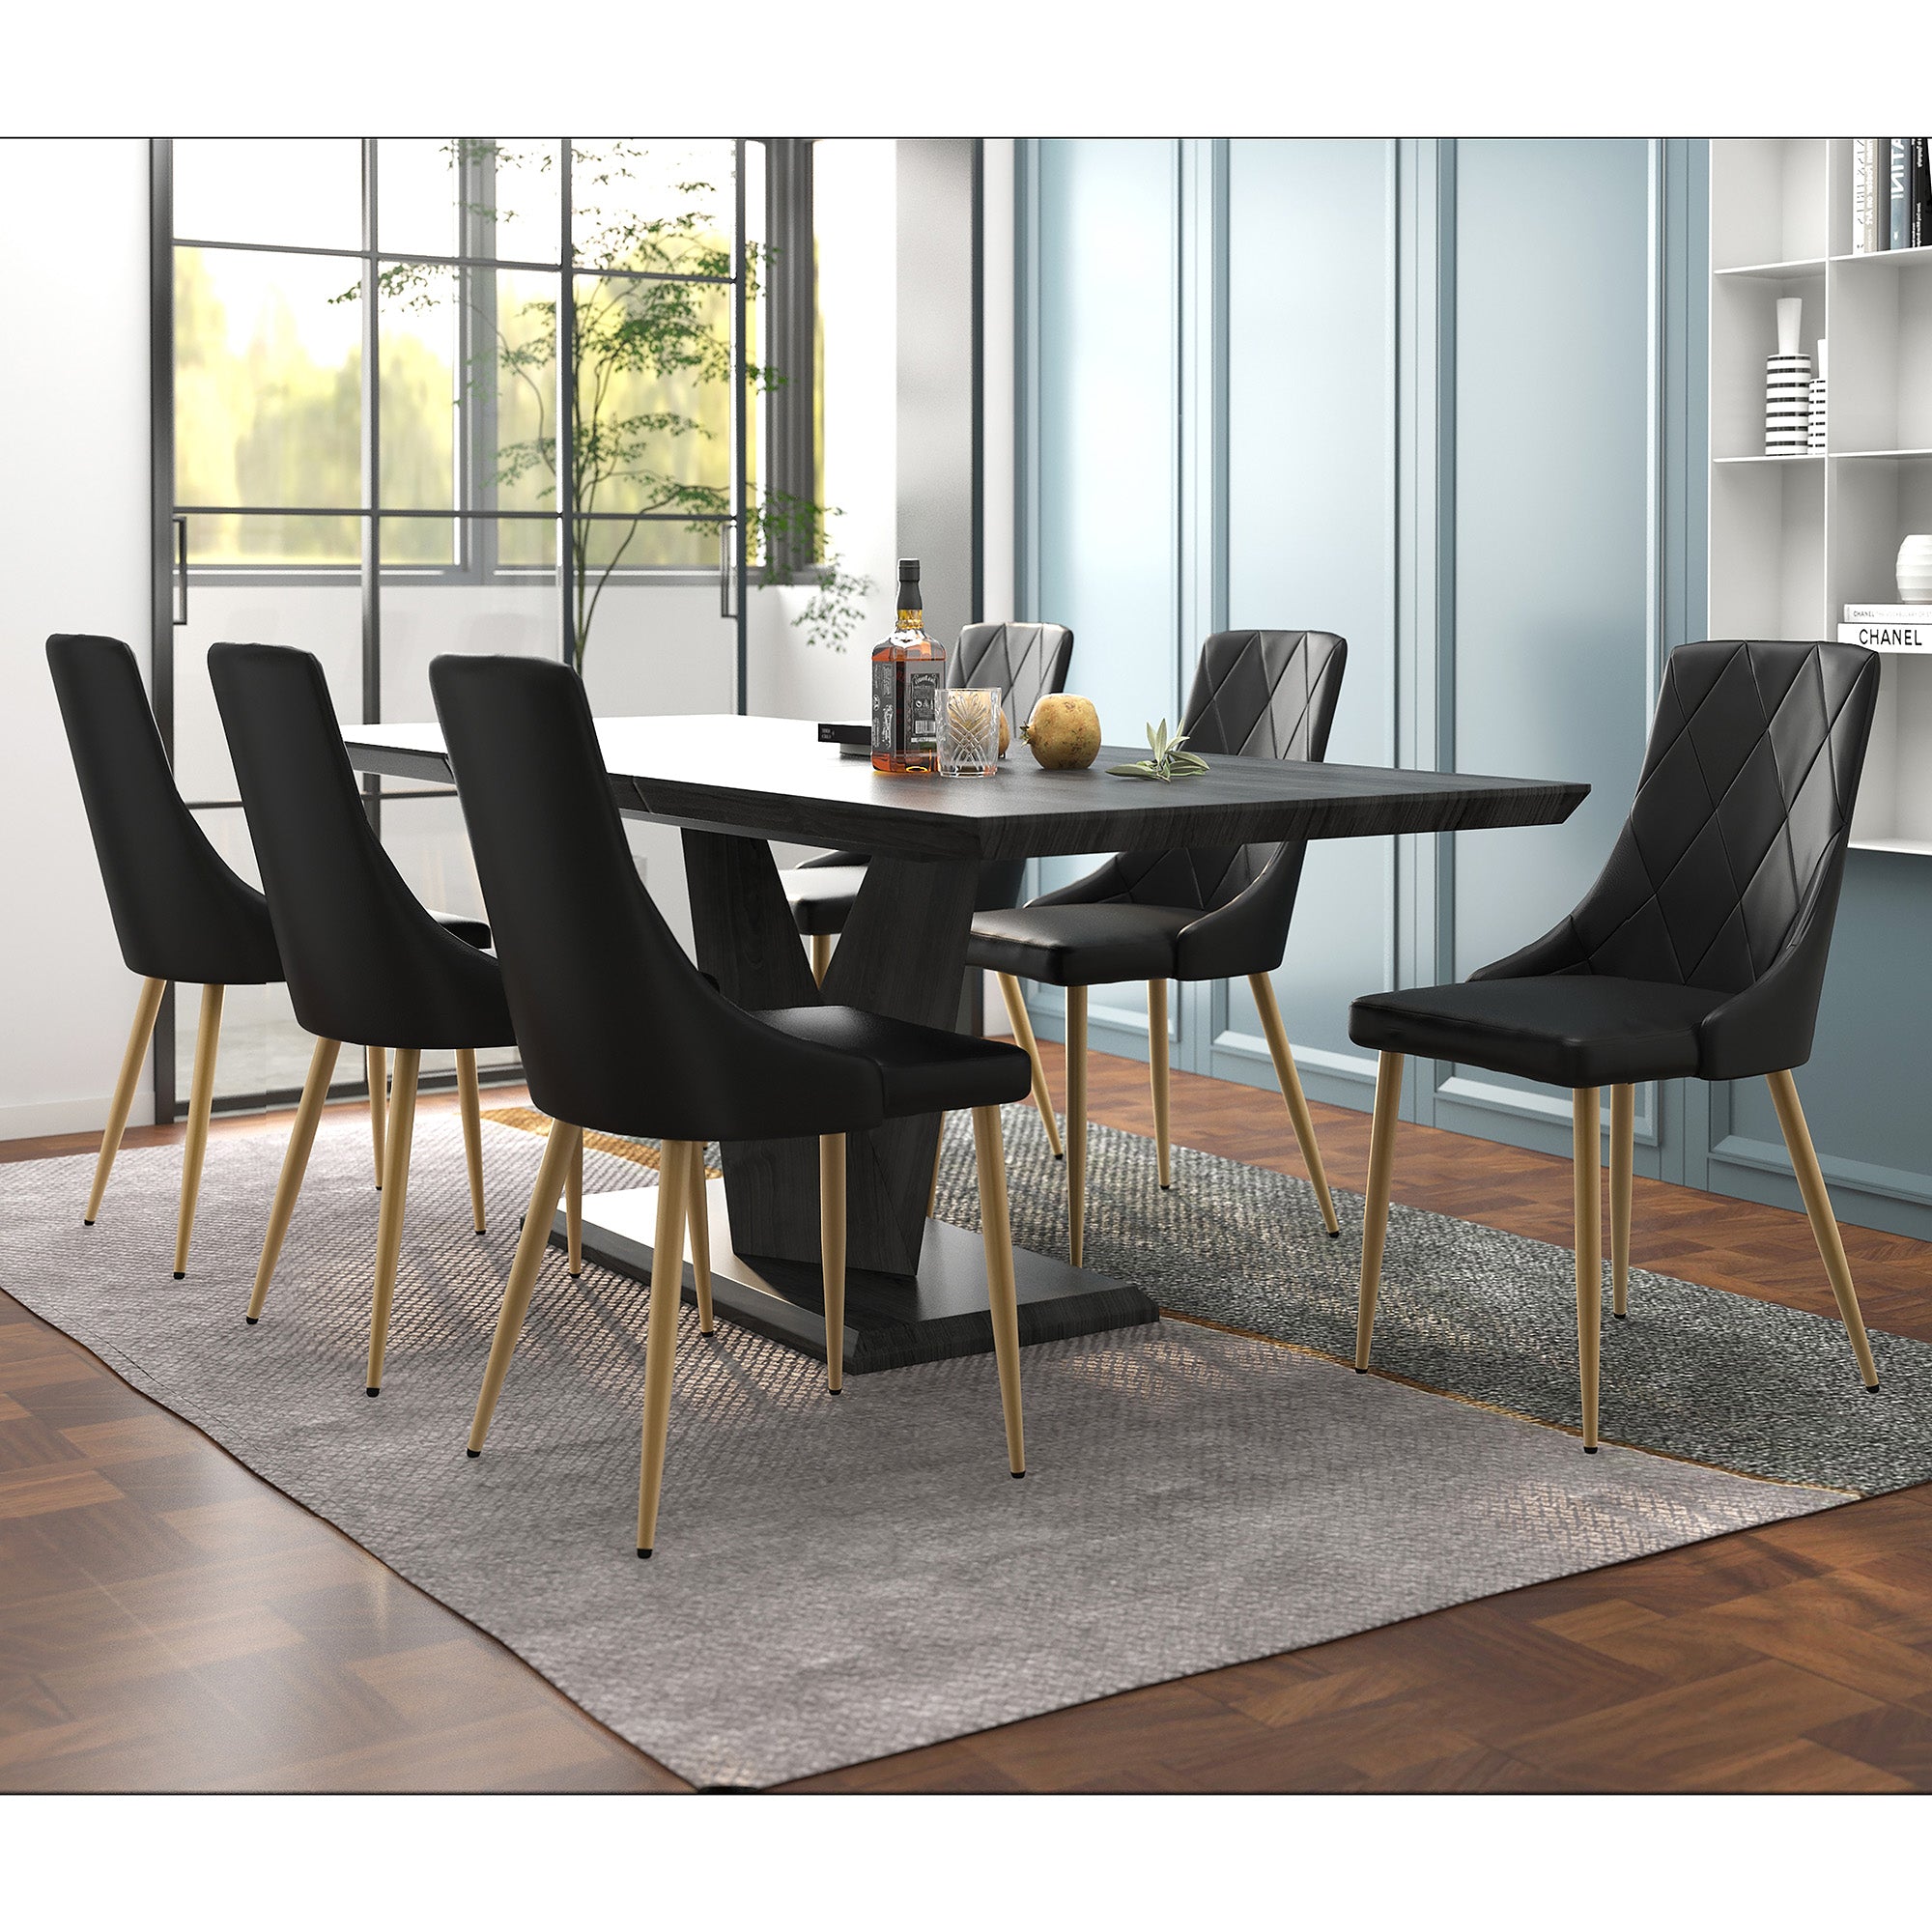 ECLIPSE EXTENSION DINING TABLE BLACK / ANTOINE BLACK CHAIRS - 7PC DINING SET